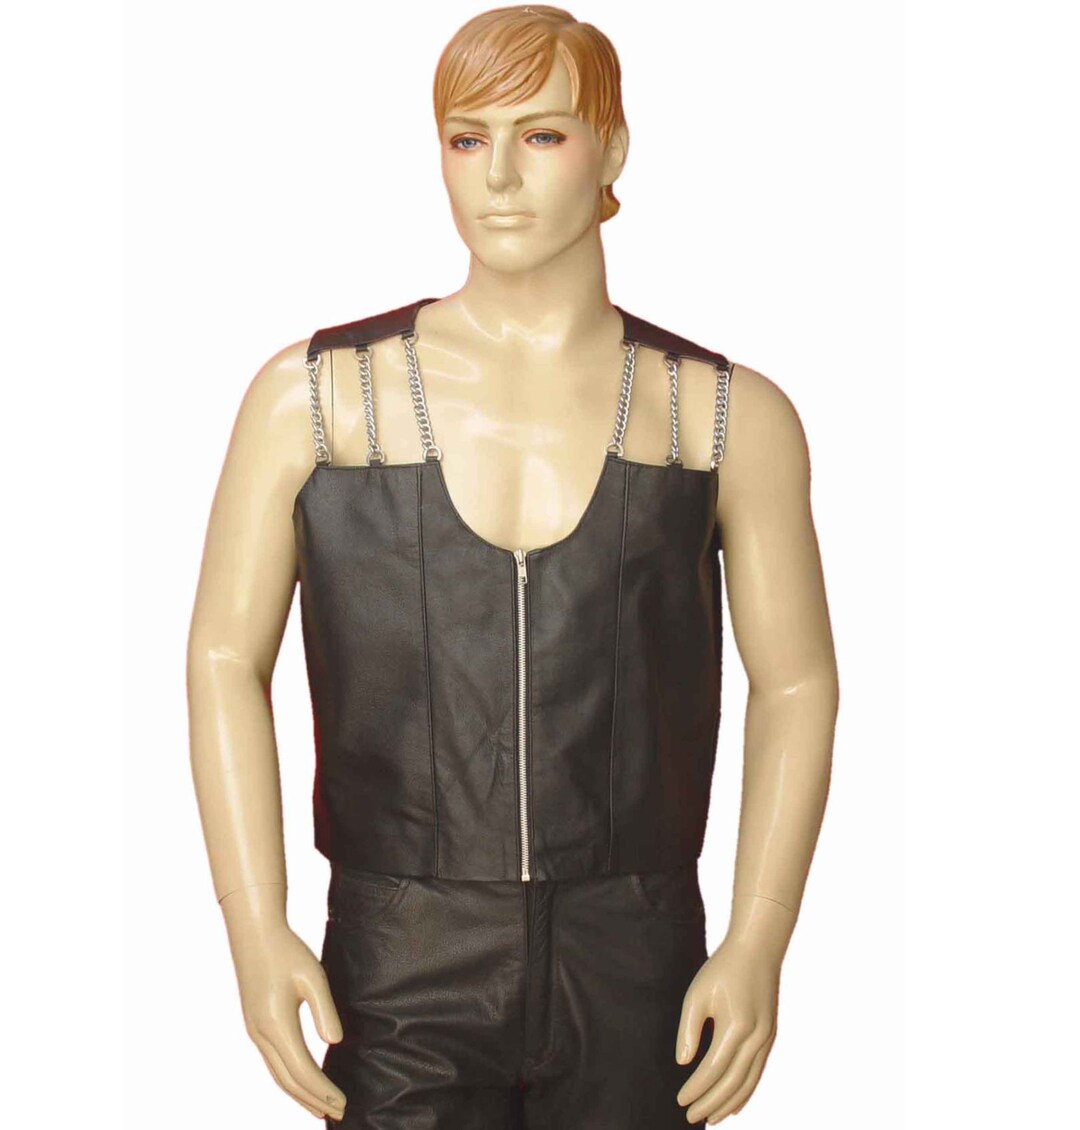 Real Leather Vest With Chain Work BVAN005 - Etsy